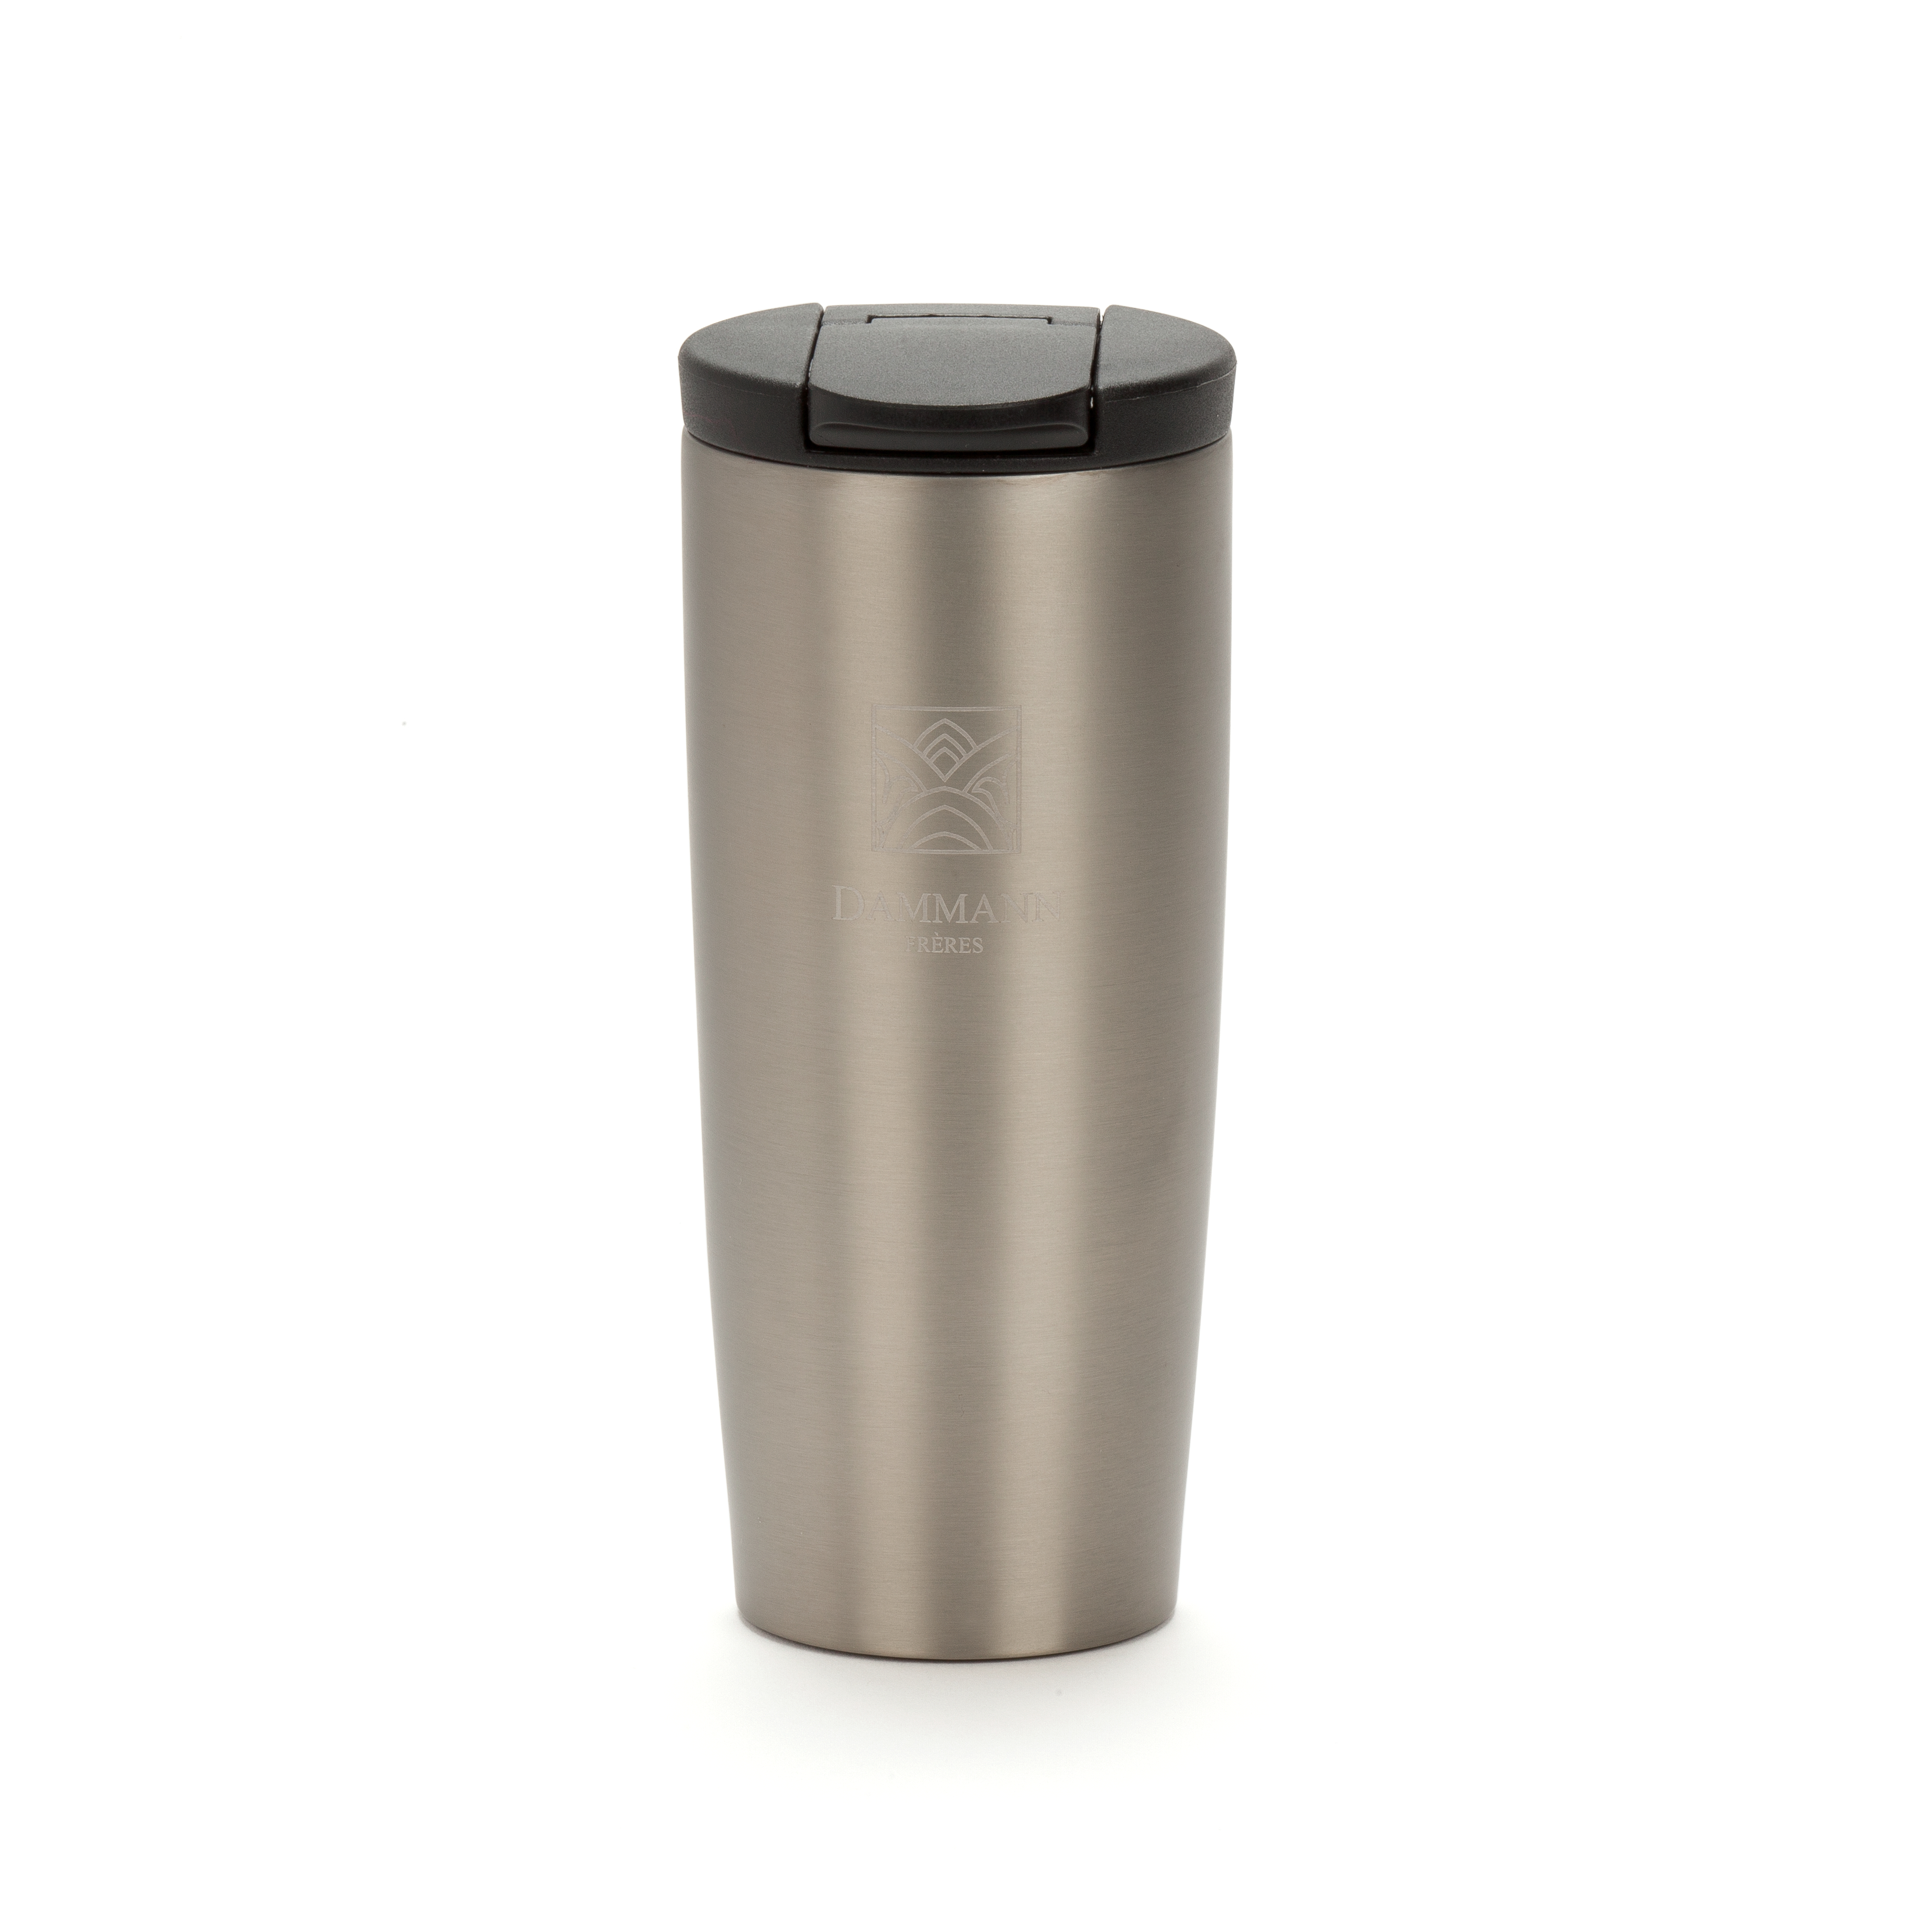 Dammann Frères "Nomade" Isothermal Pearl Grey Travel Mug, Caddy / Container, 18-21-9920